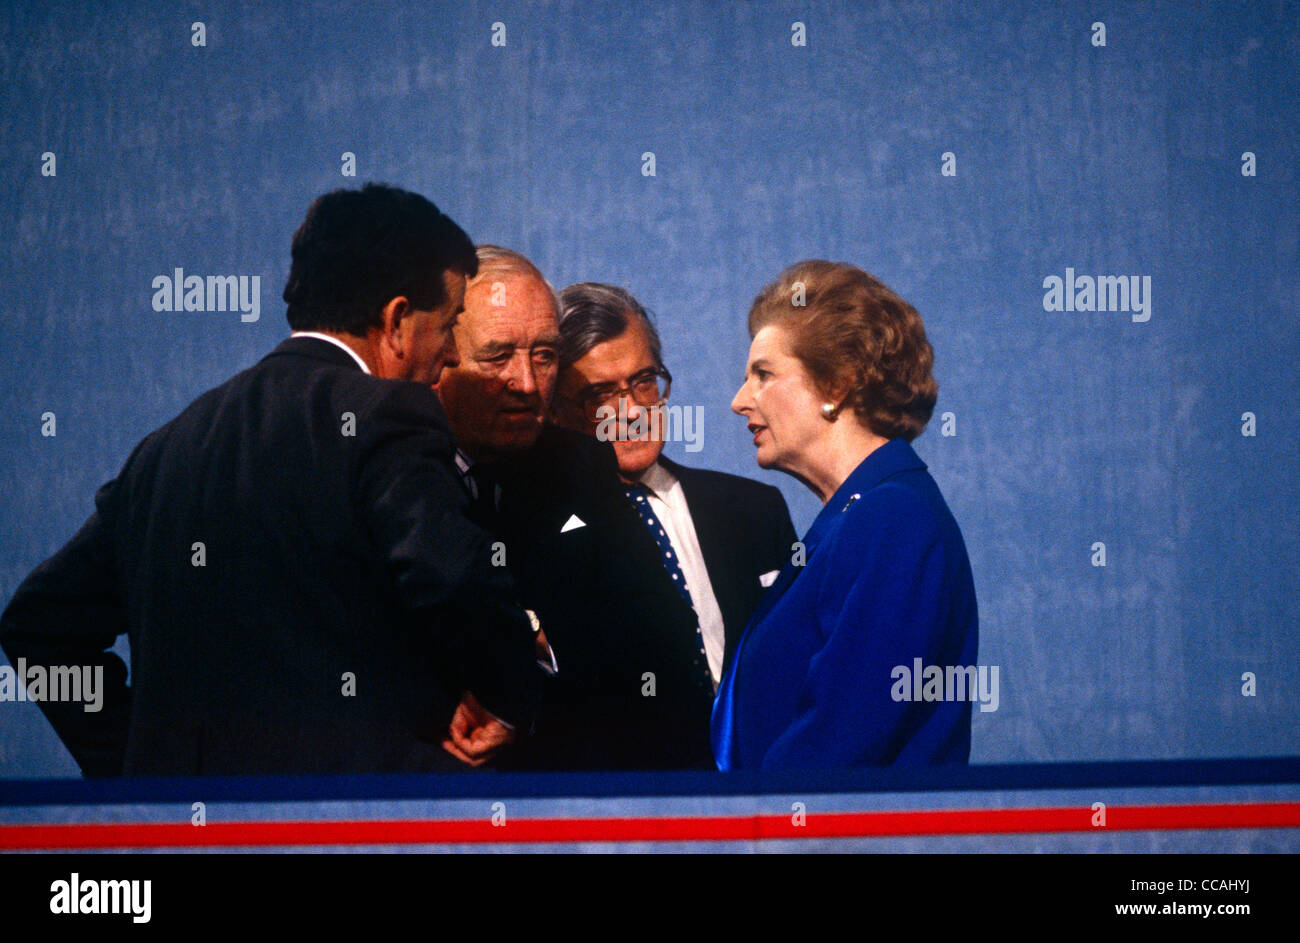 Ex British Prime Minister Margaret Thatcher speaks with ex colleagues on podium during John Major's 1991 Tory party conference. Stock Photo